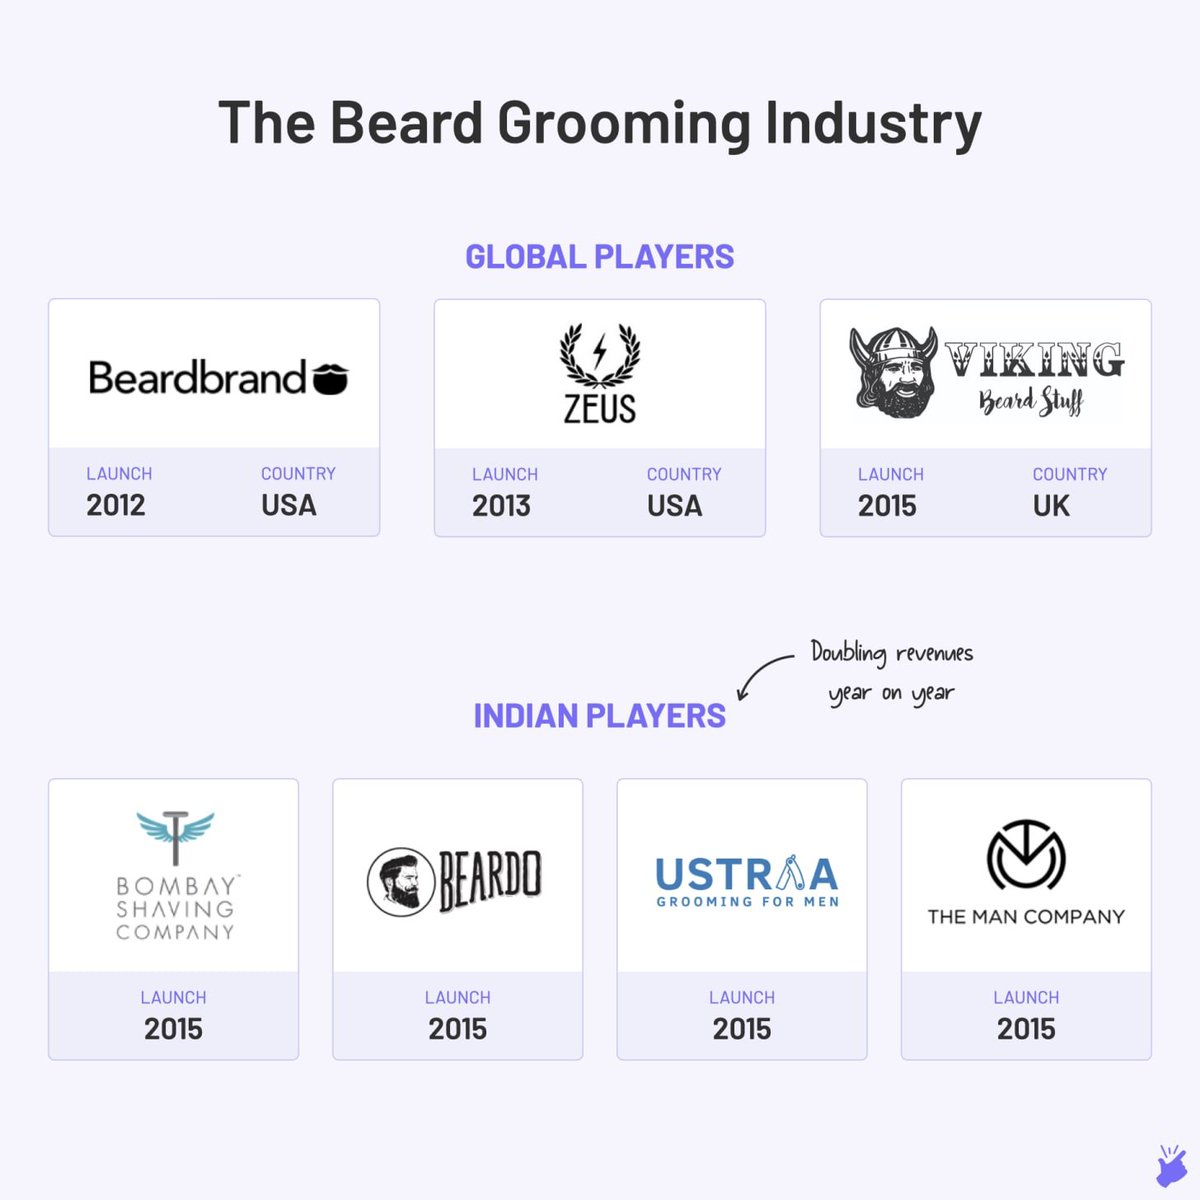 11/ To seize this new trend, many beard grooming startups were started in the last few years (see pic). Every $ they sold was coming out of Gillette's existing or potential market